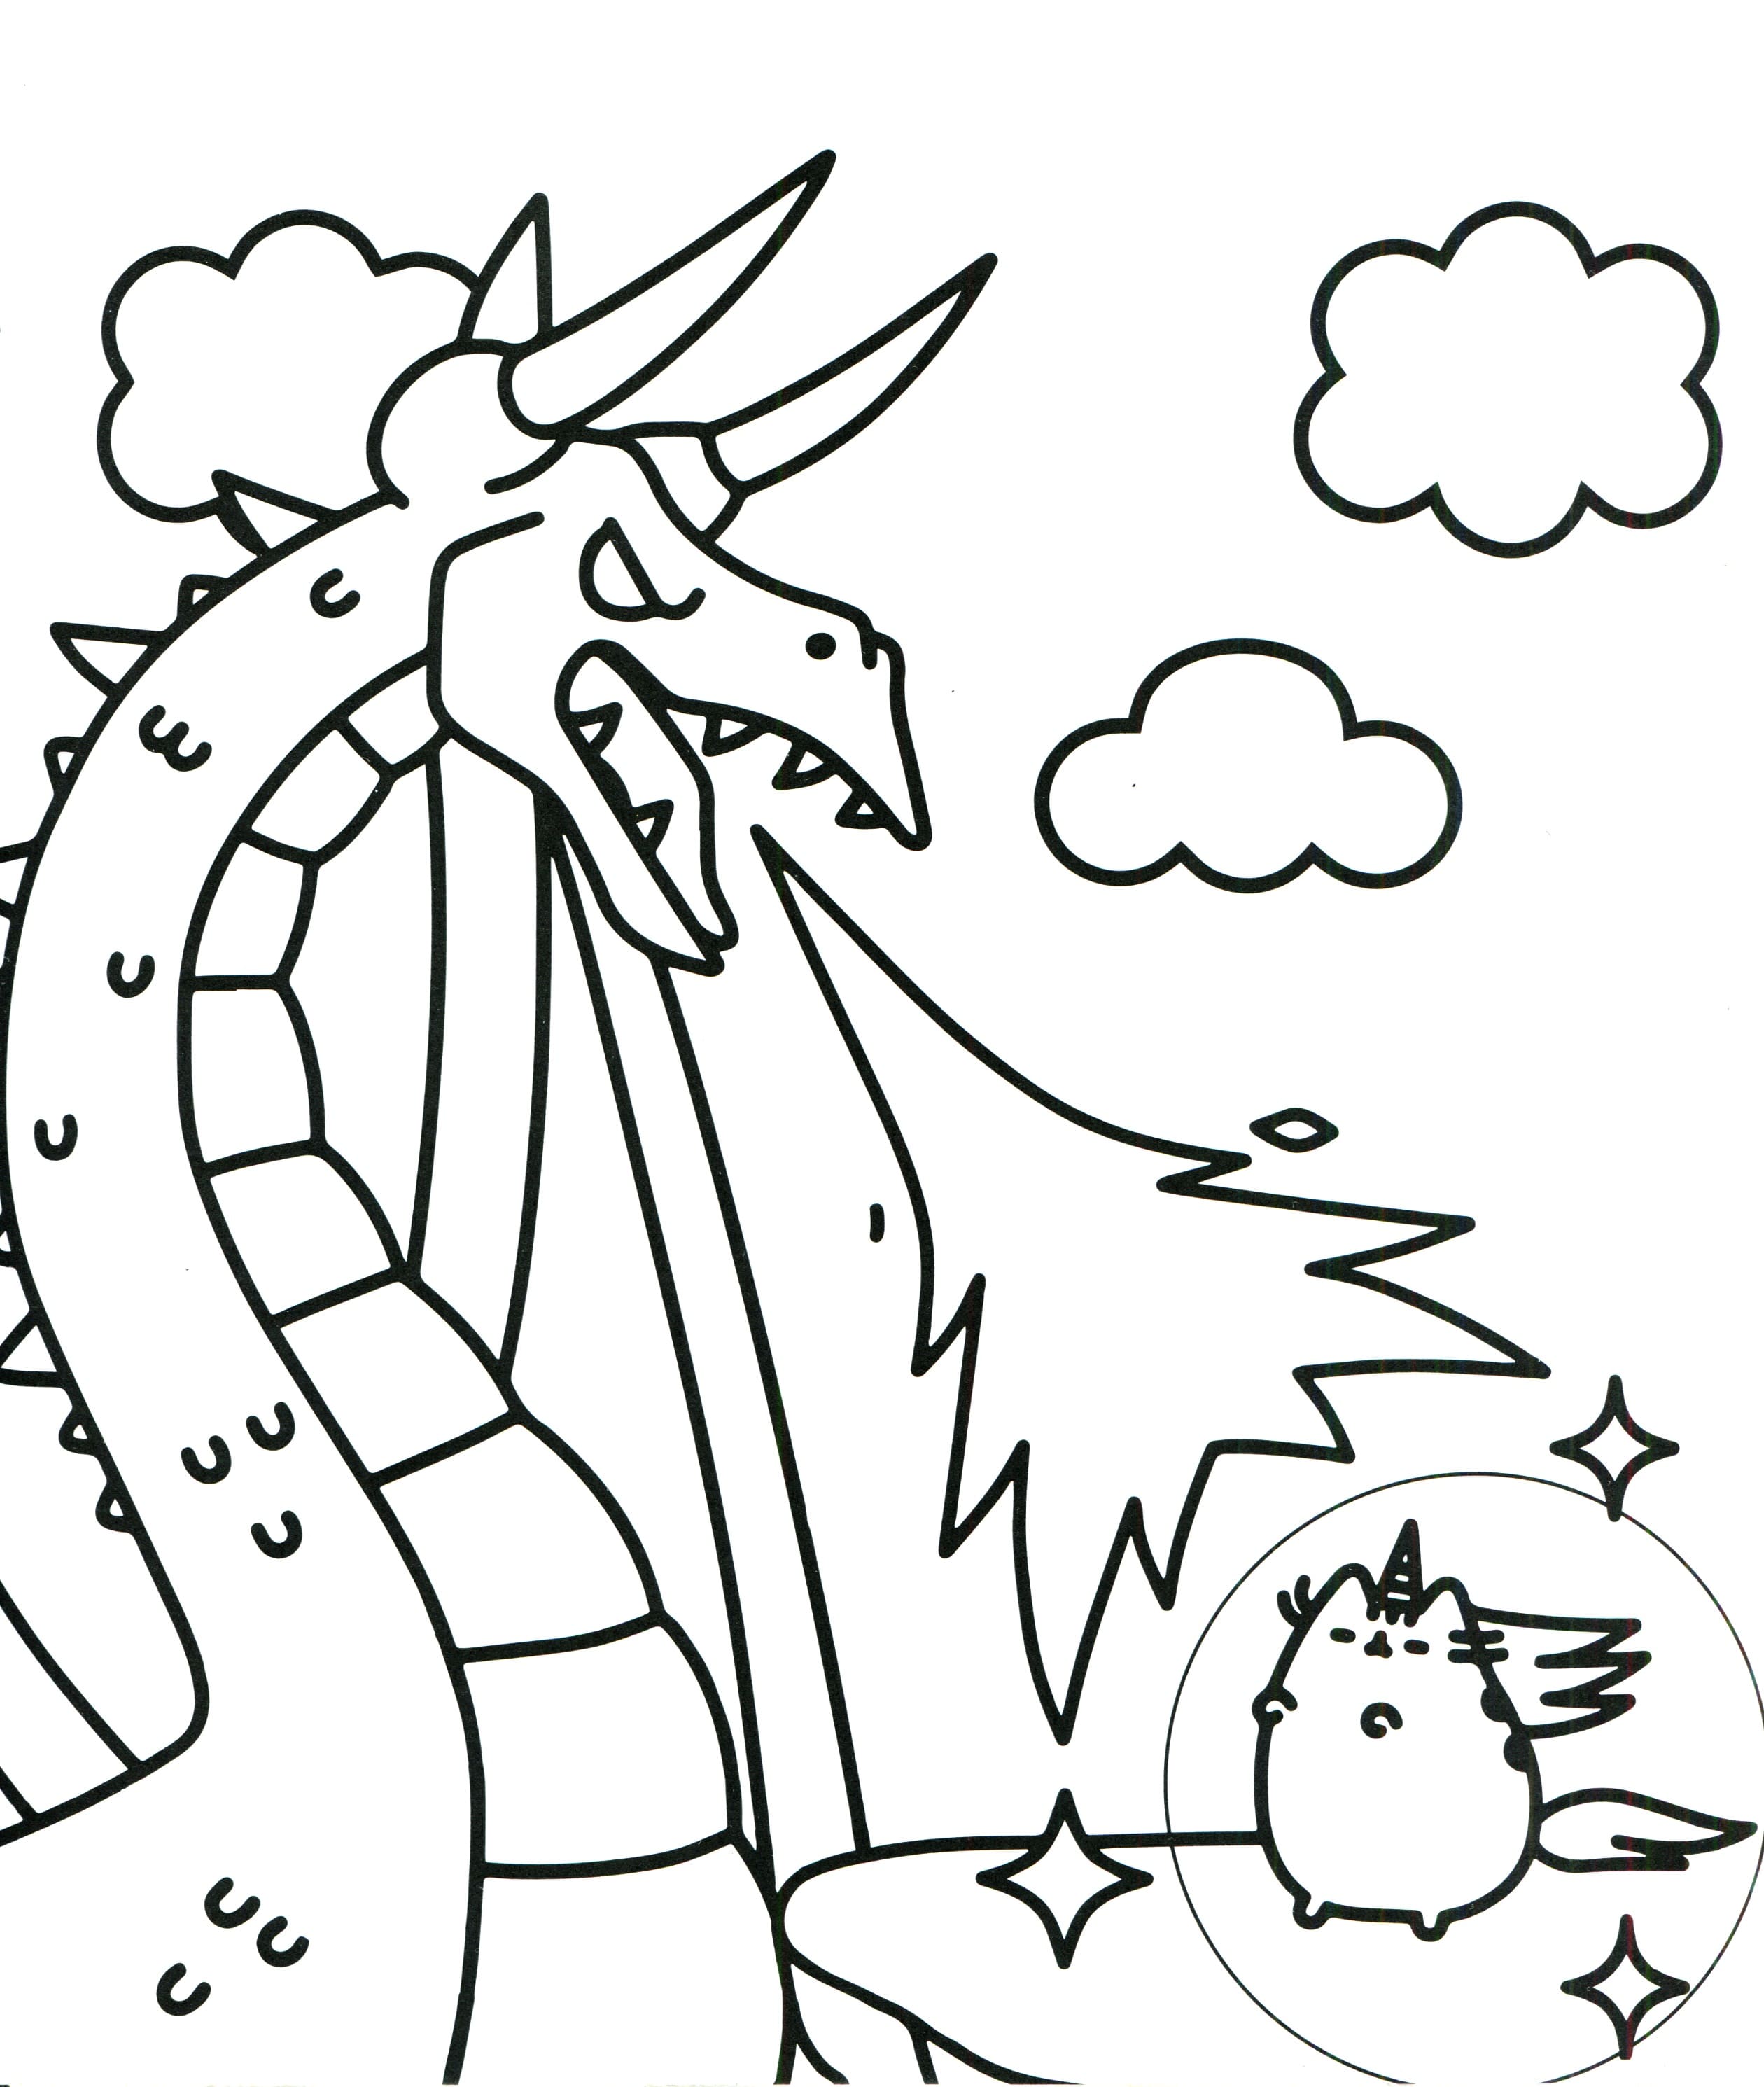 Cool Pusheen Cat 20 Coloring Page